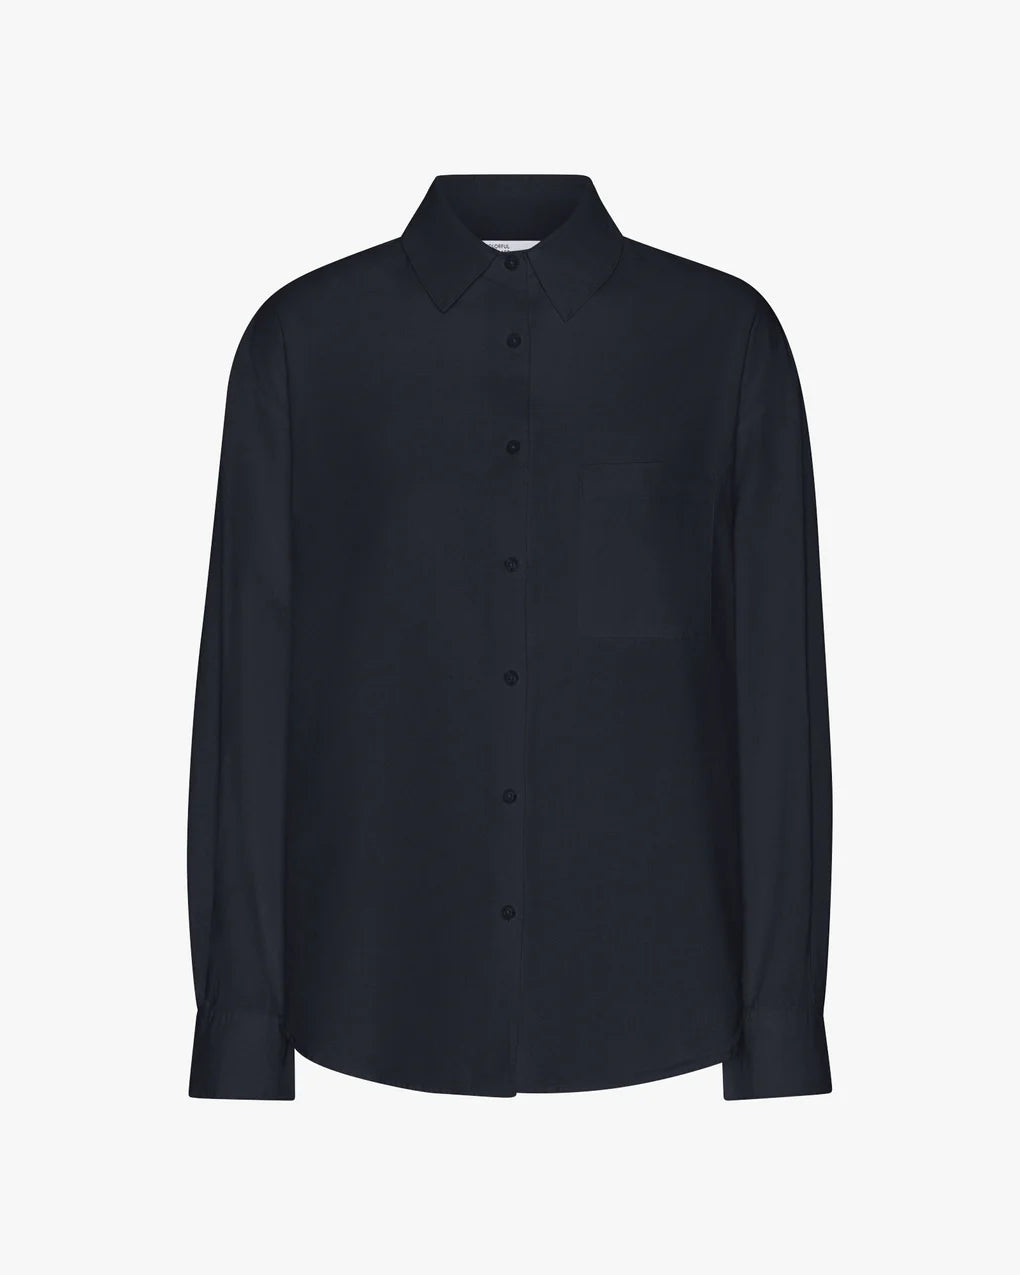 An Organic Oversized Shirt by Colorful Standard in navy with buttons and cuffs.